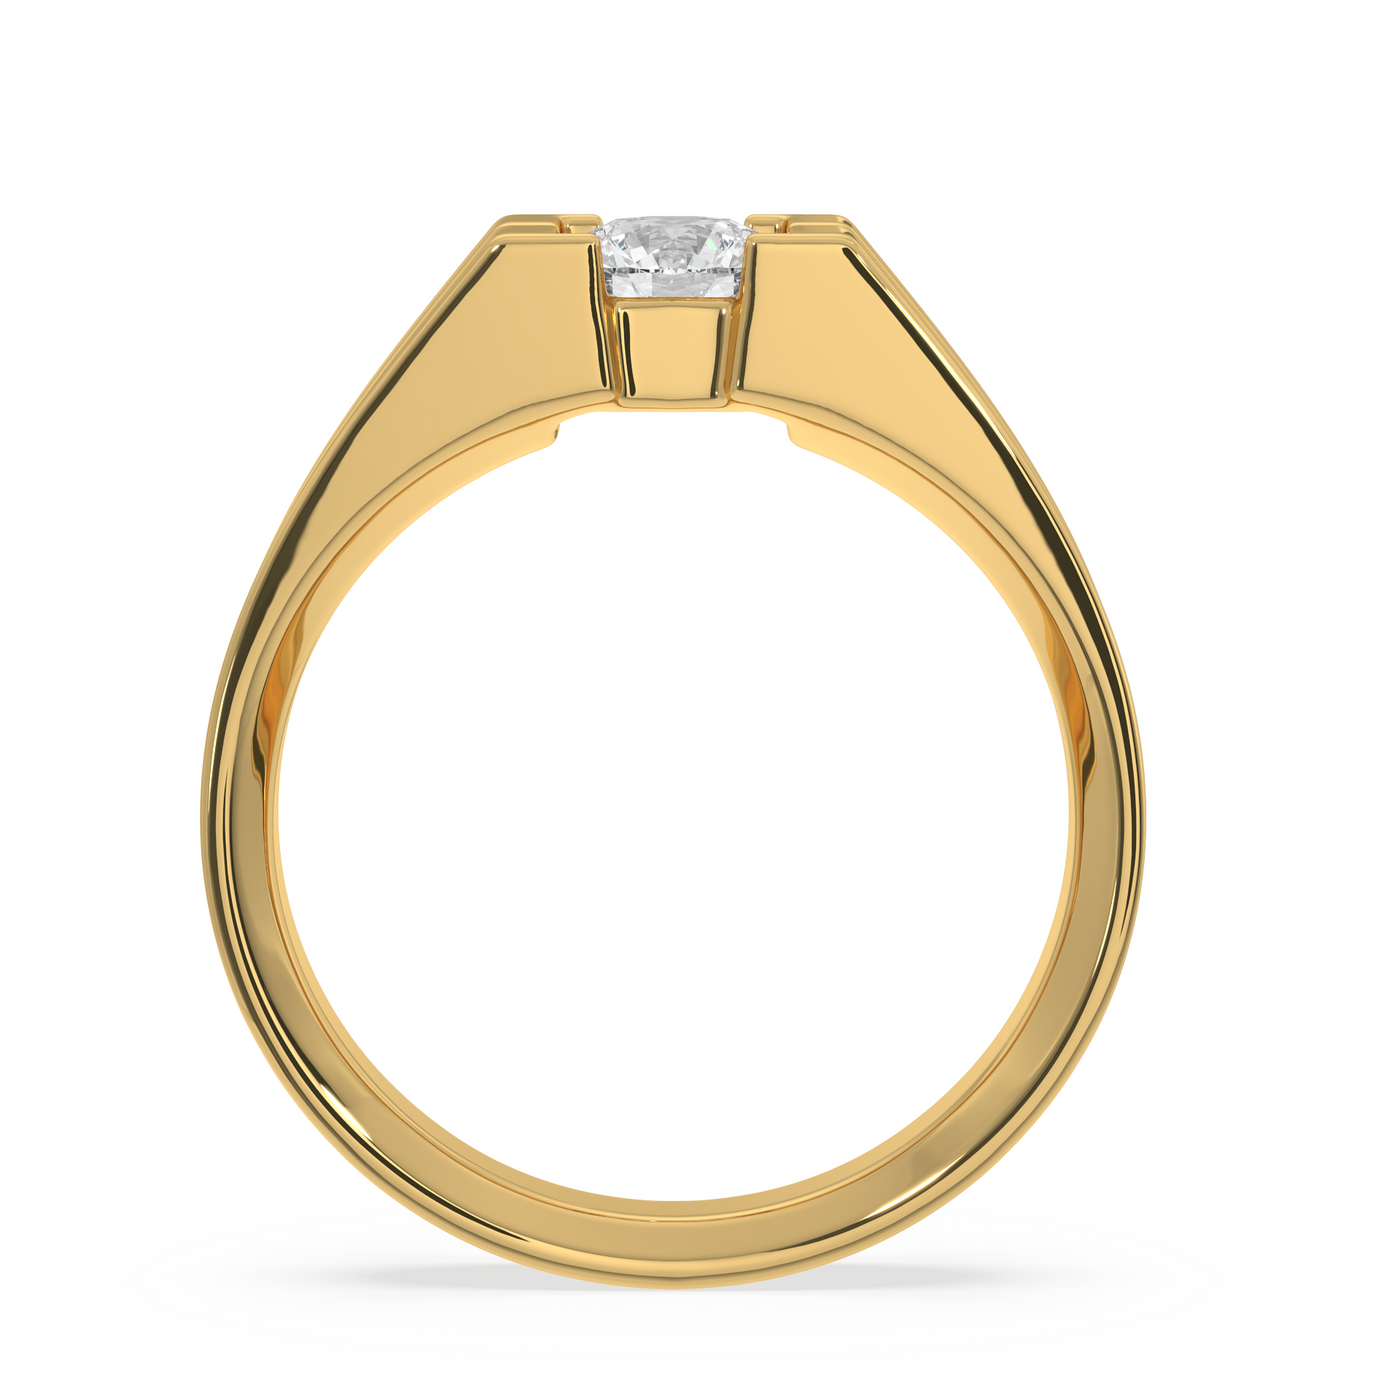 SY Men's Ring in Gold, Channel-Setting